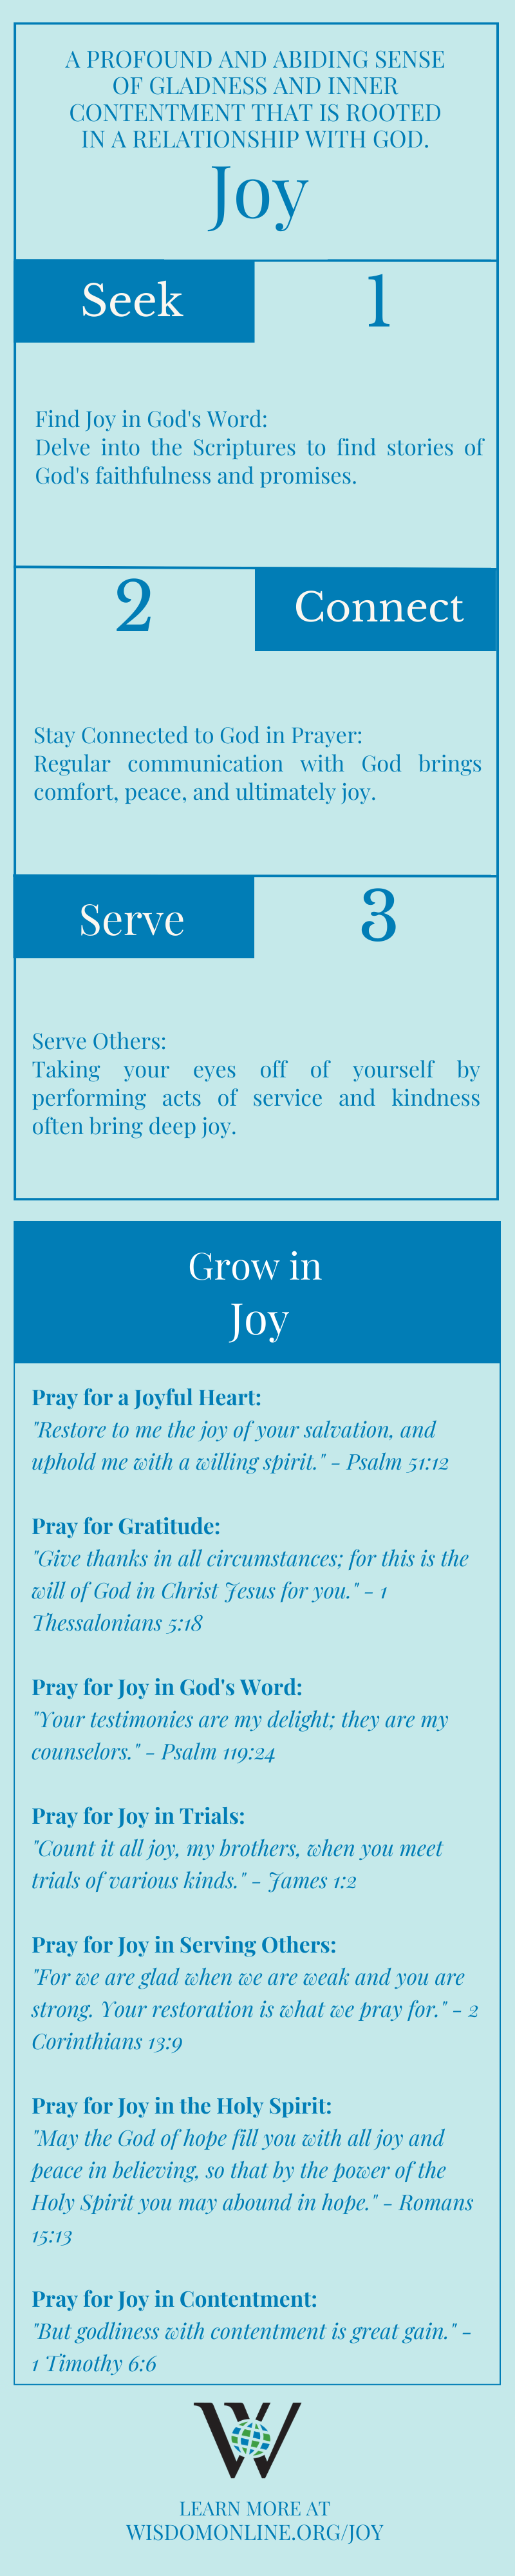 Infographic on the Biblical characteristic of joy